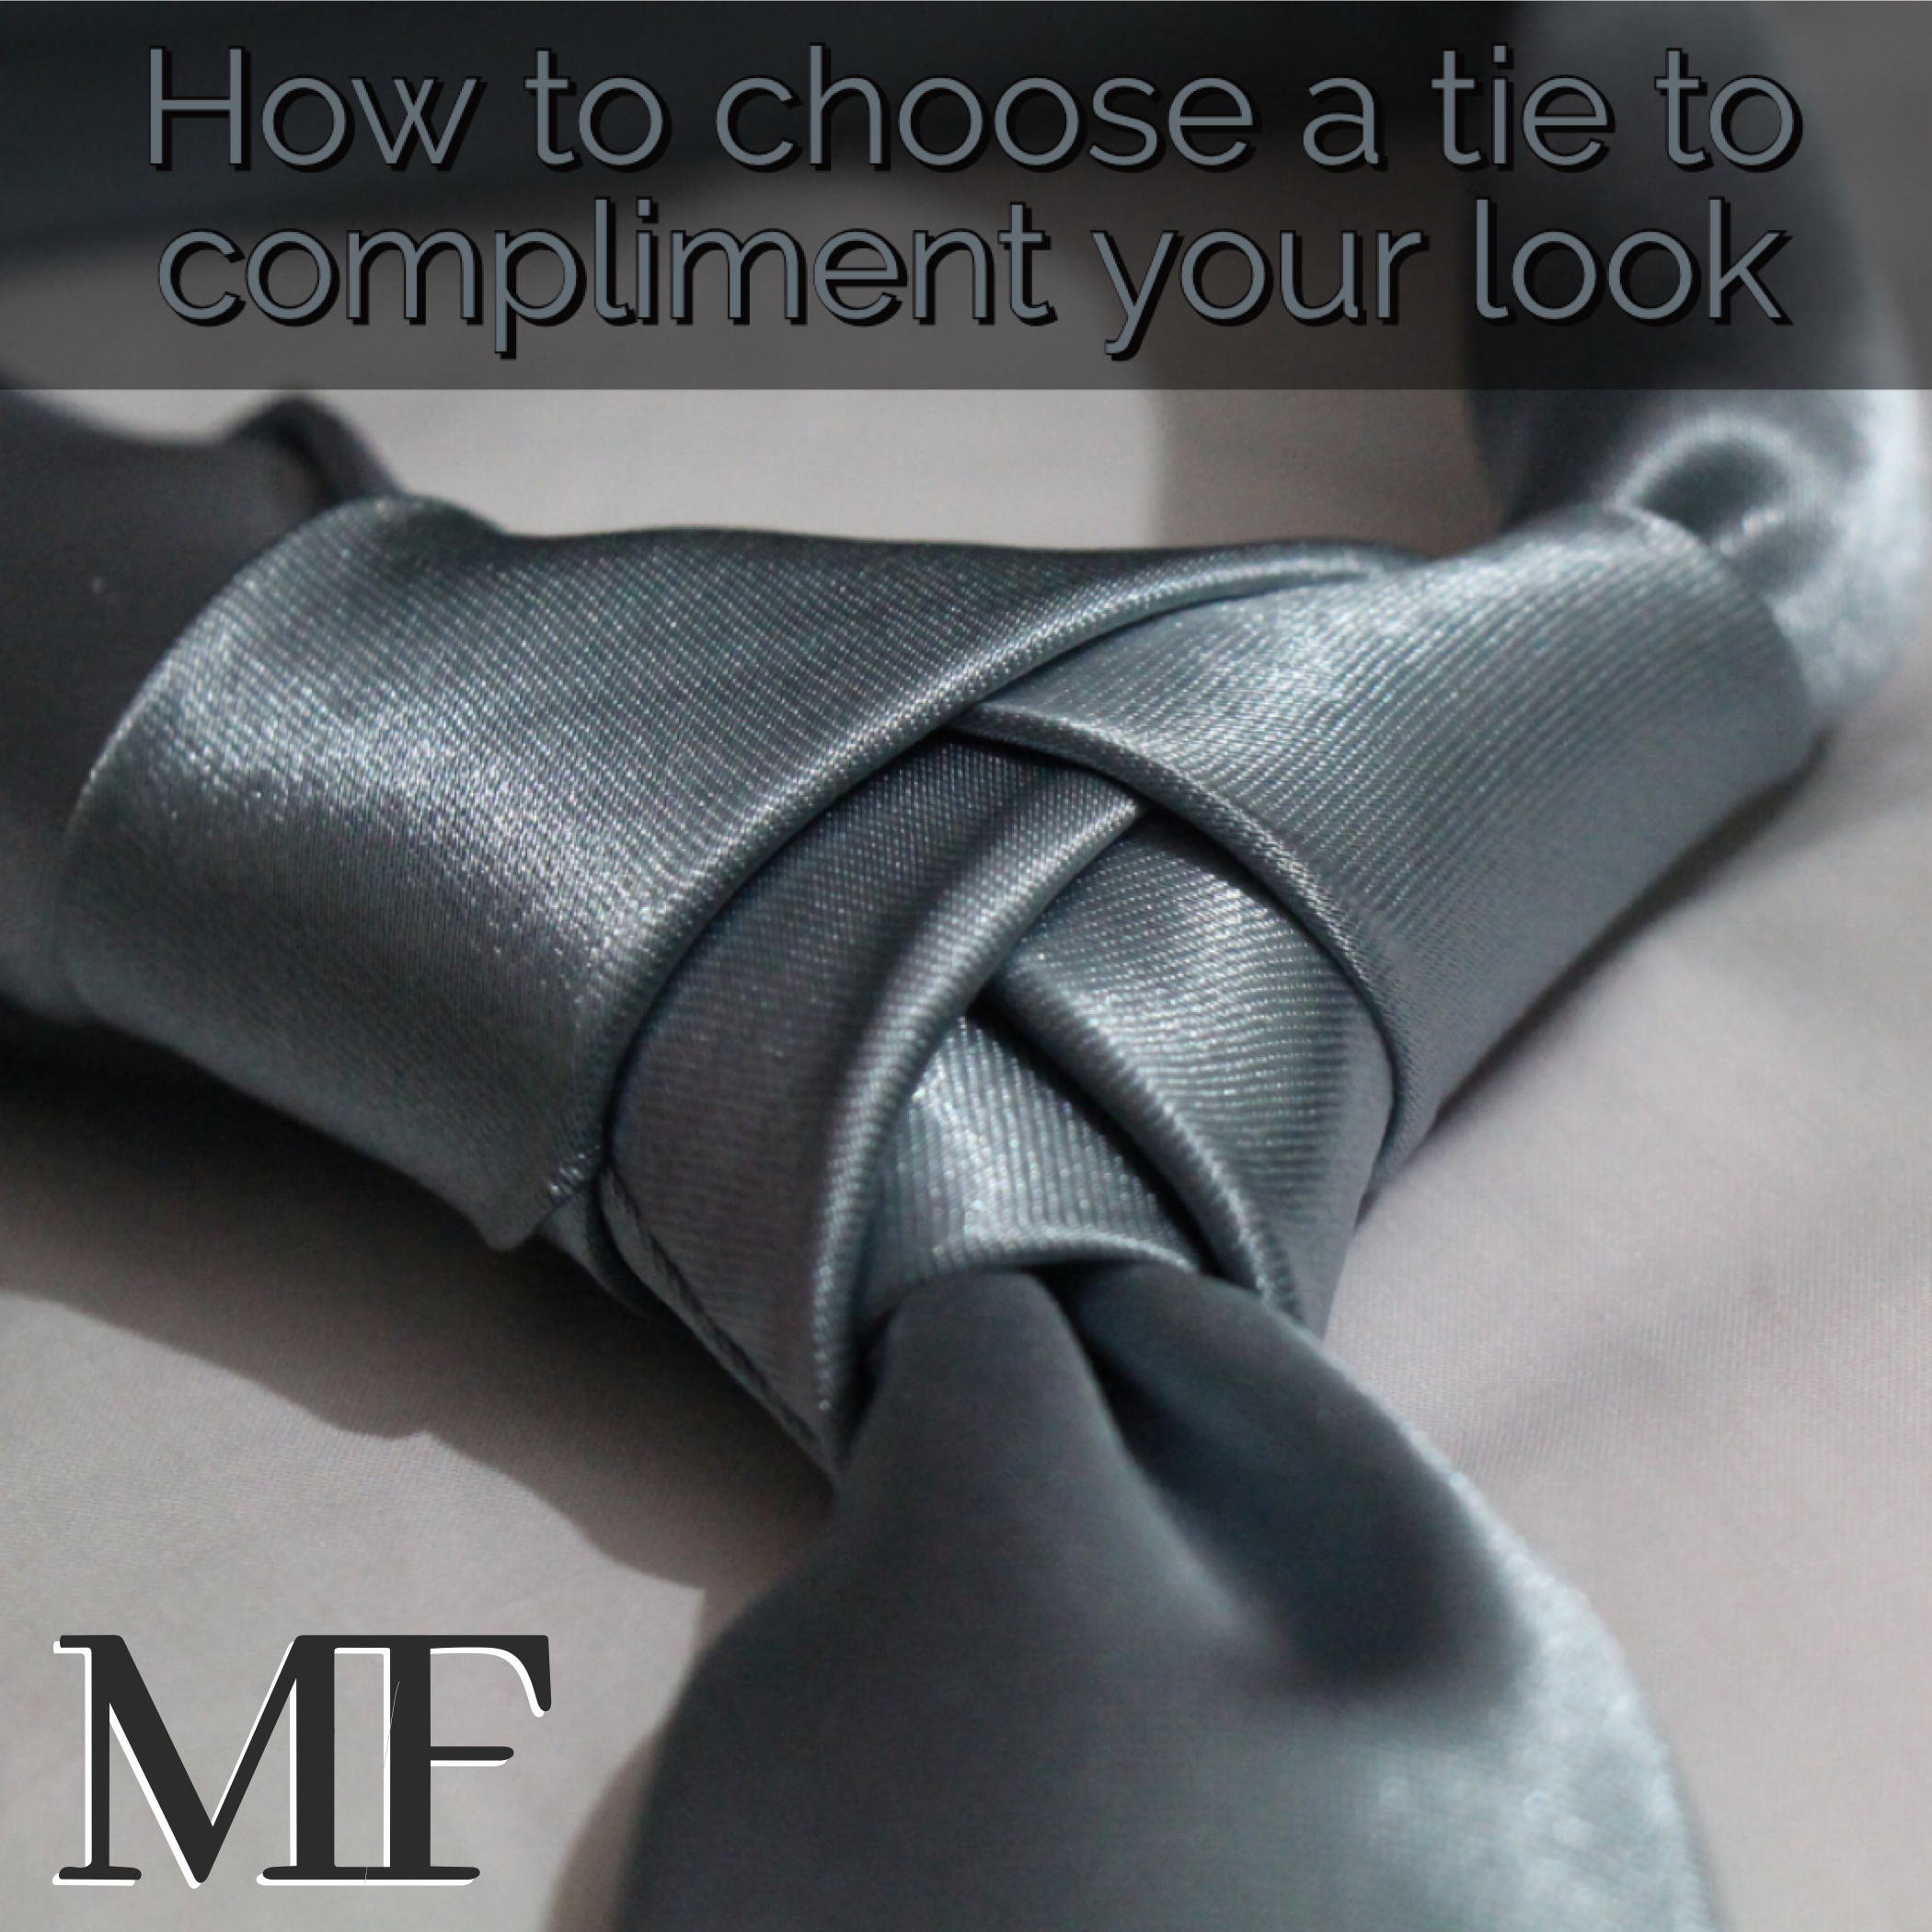 How to choose a tie to compliment your look.